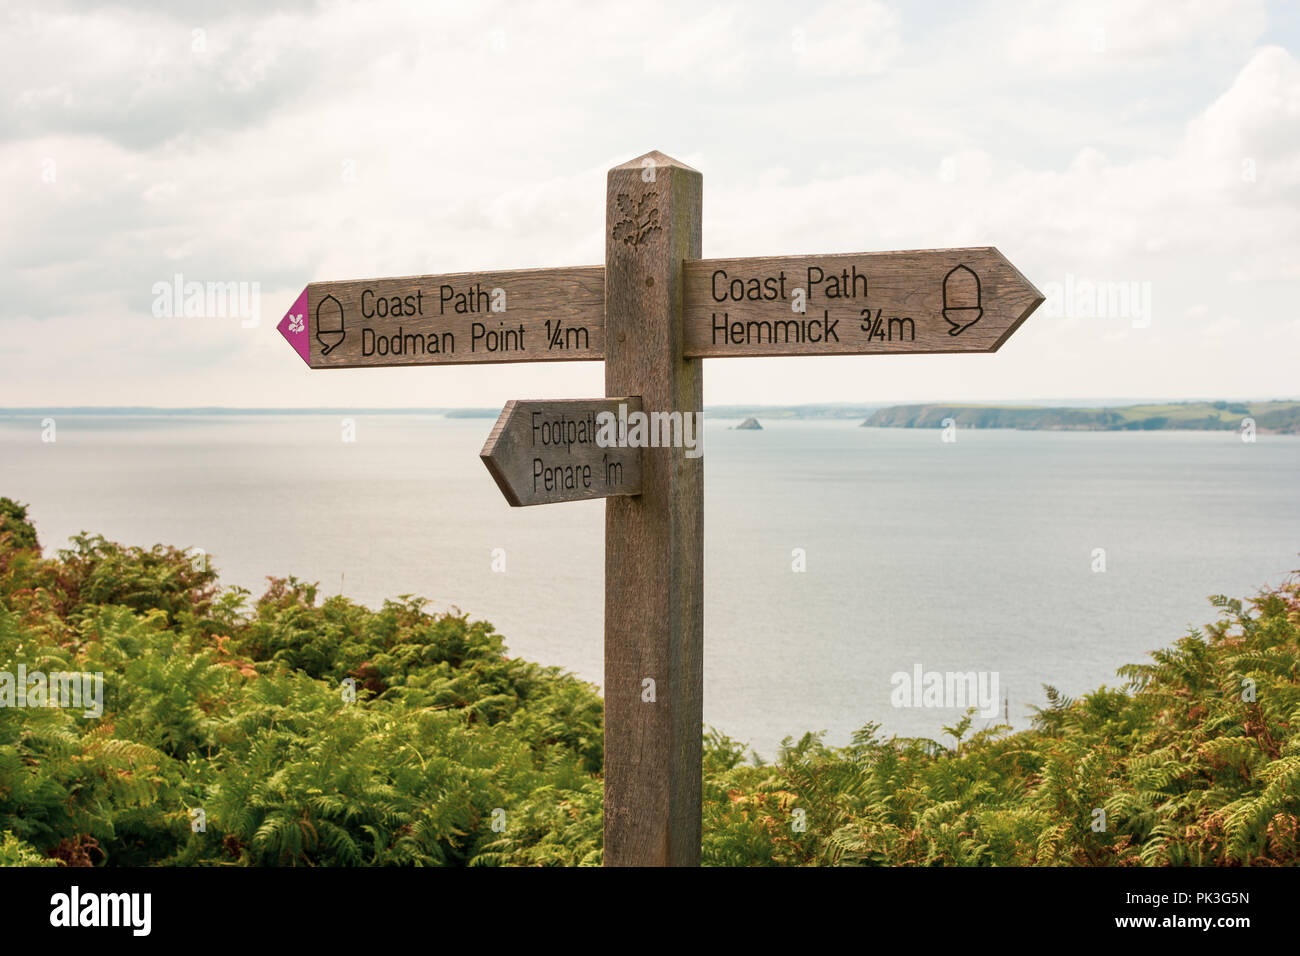 South West Coastal Path signpost for Dodman Point, Hemmick and Penare, South Cornwall, England, UK Stock Photo